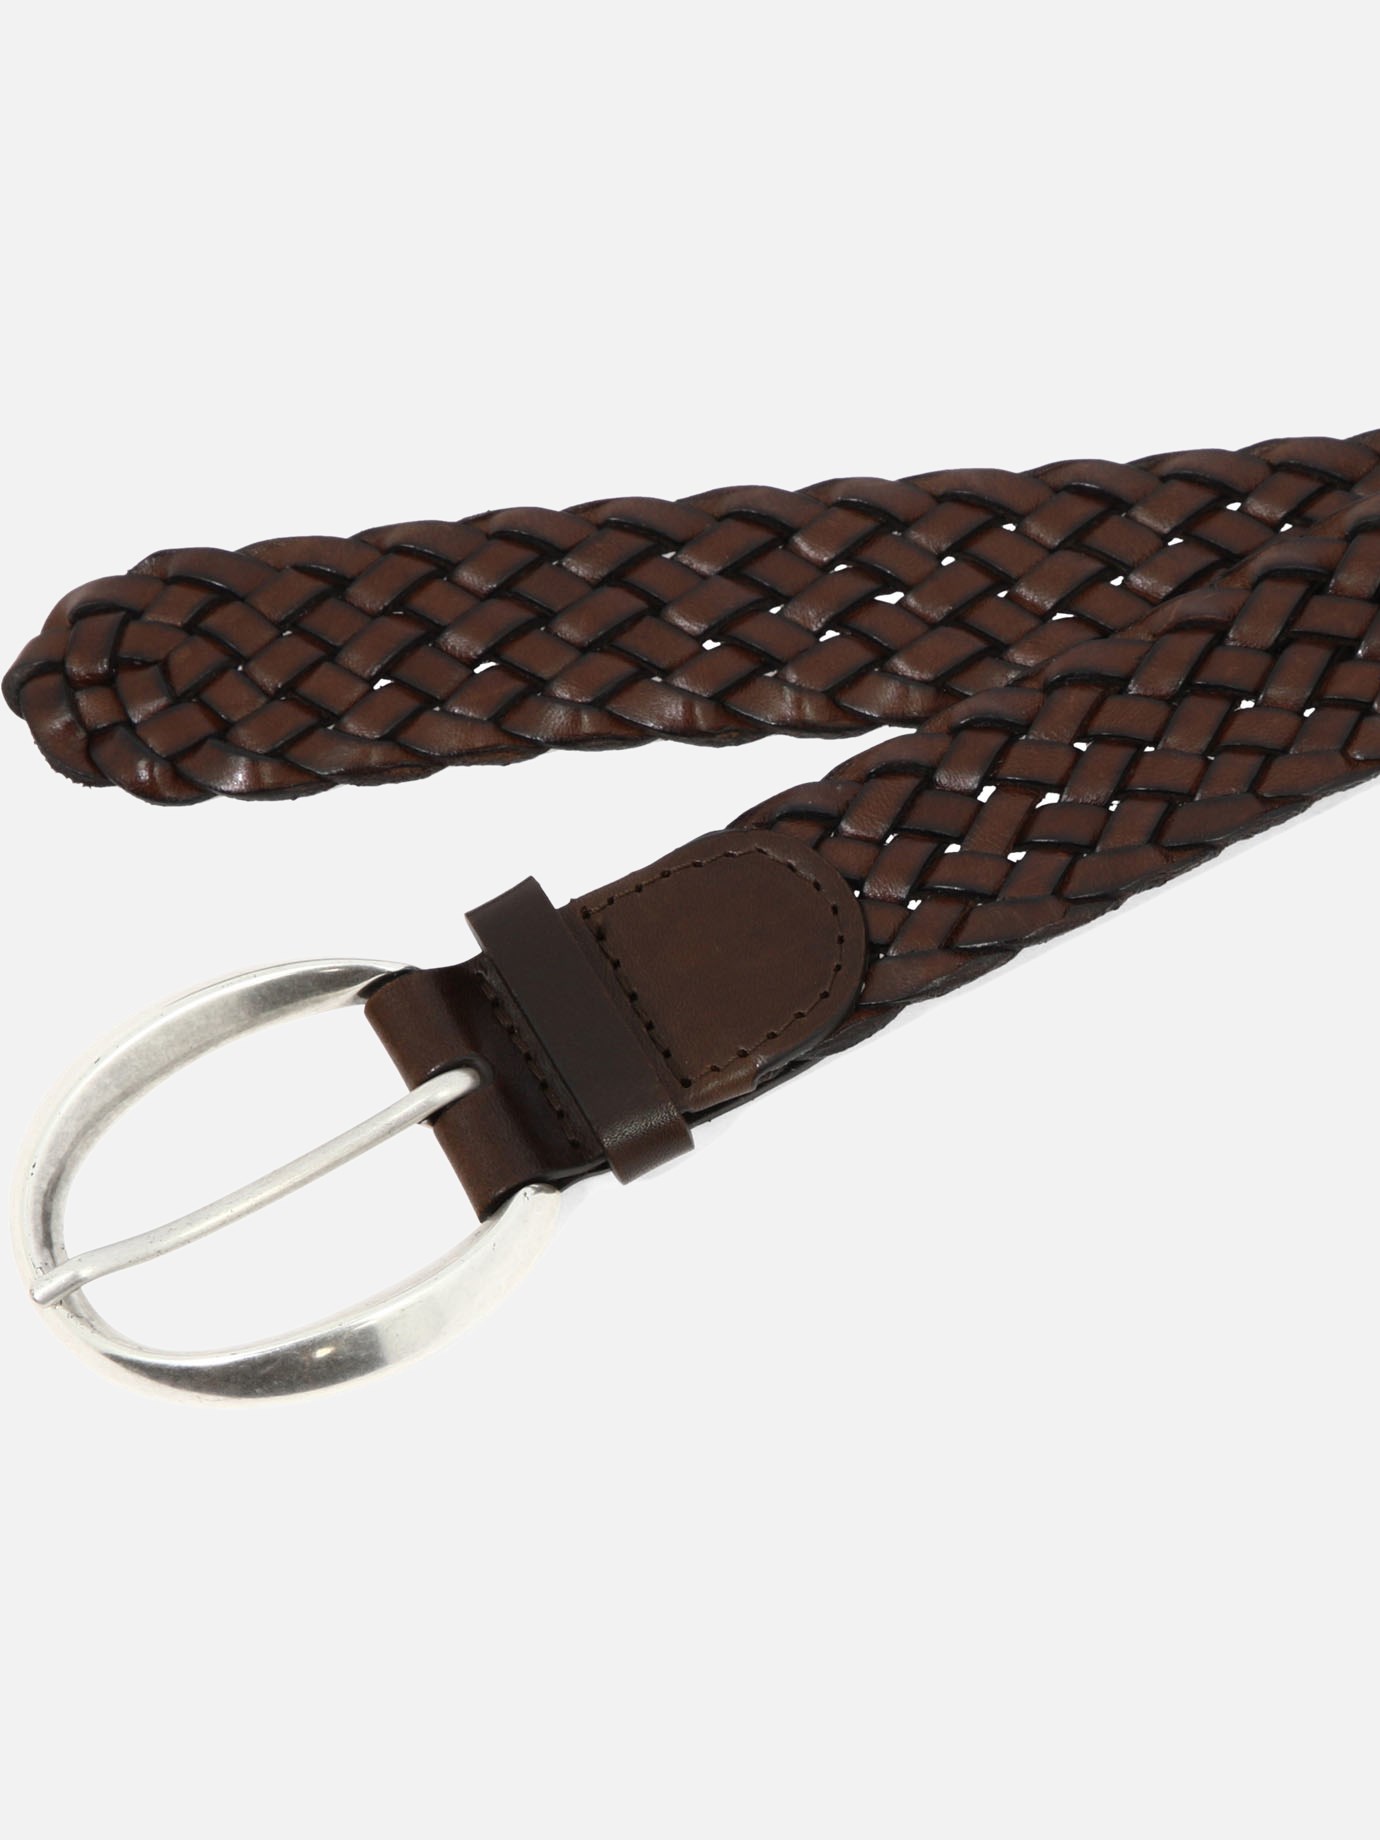 Woven leather belt by Orciani